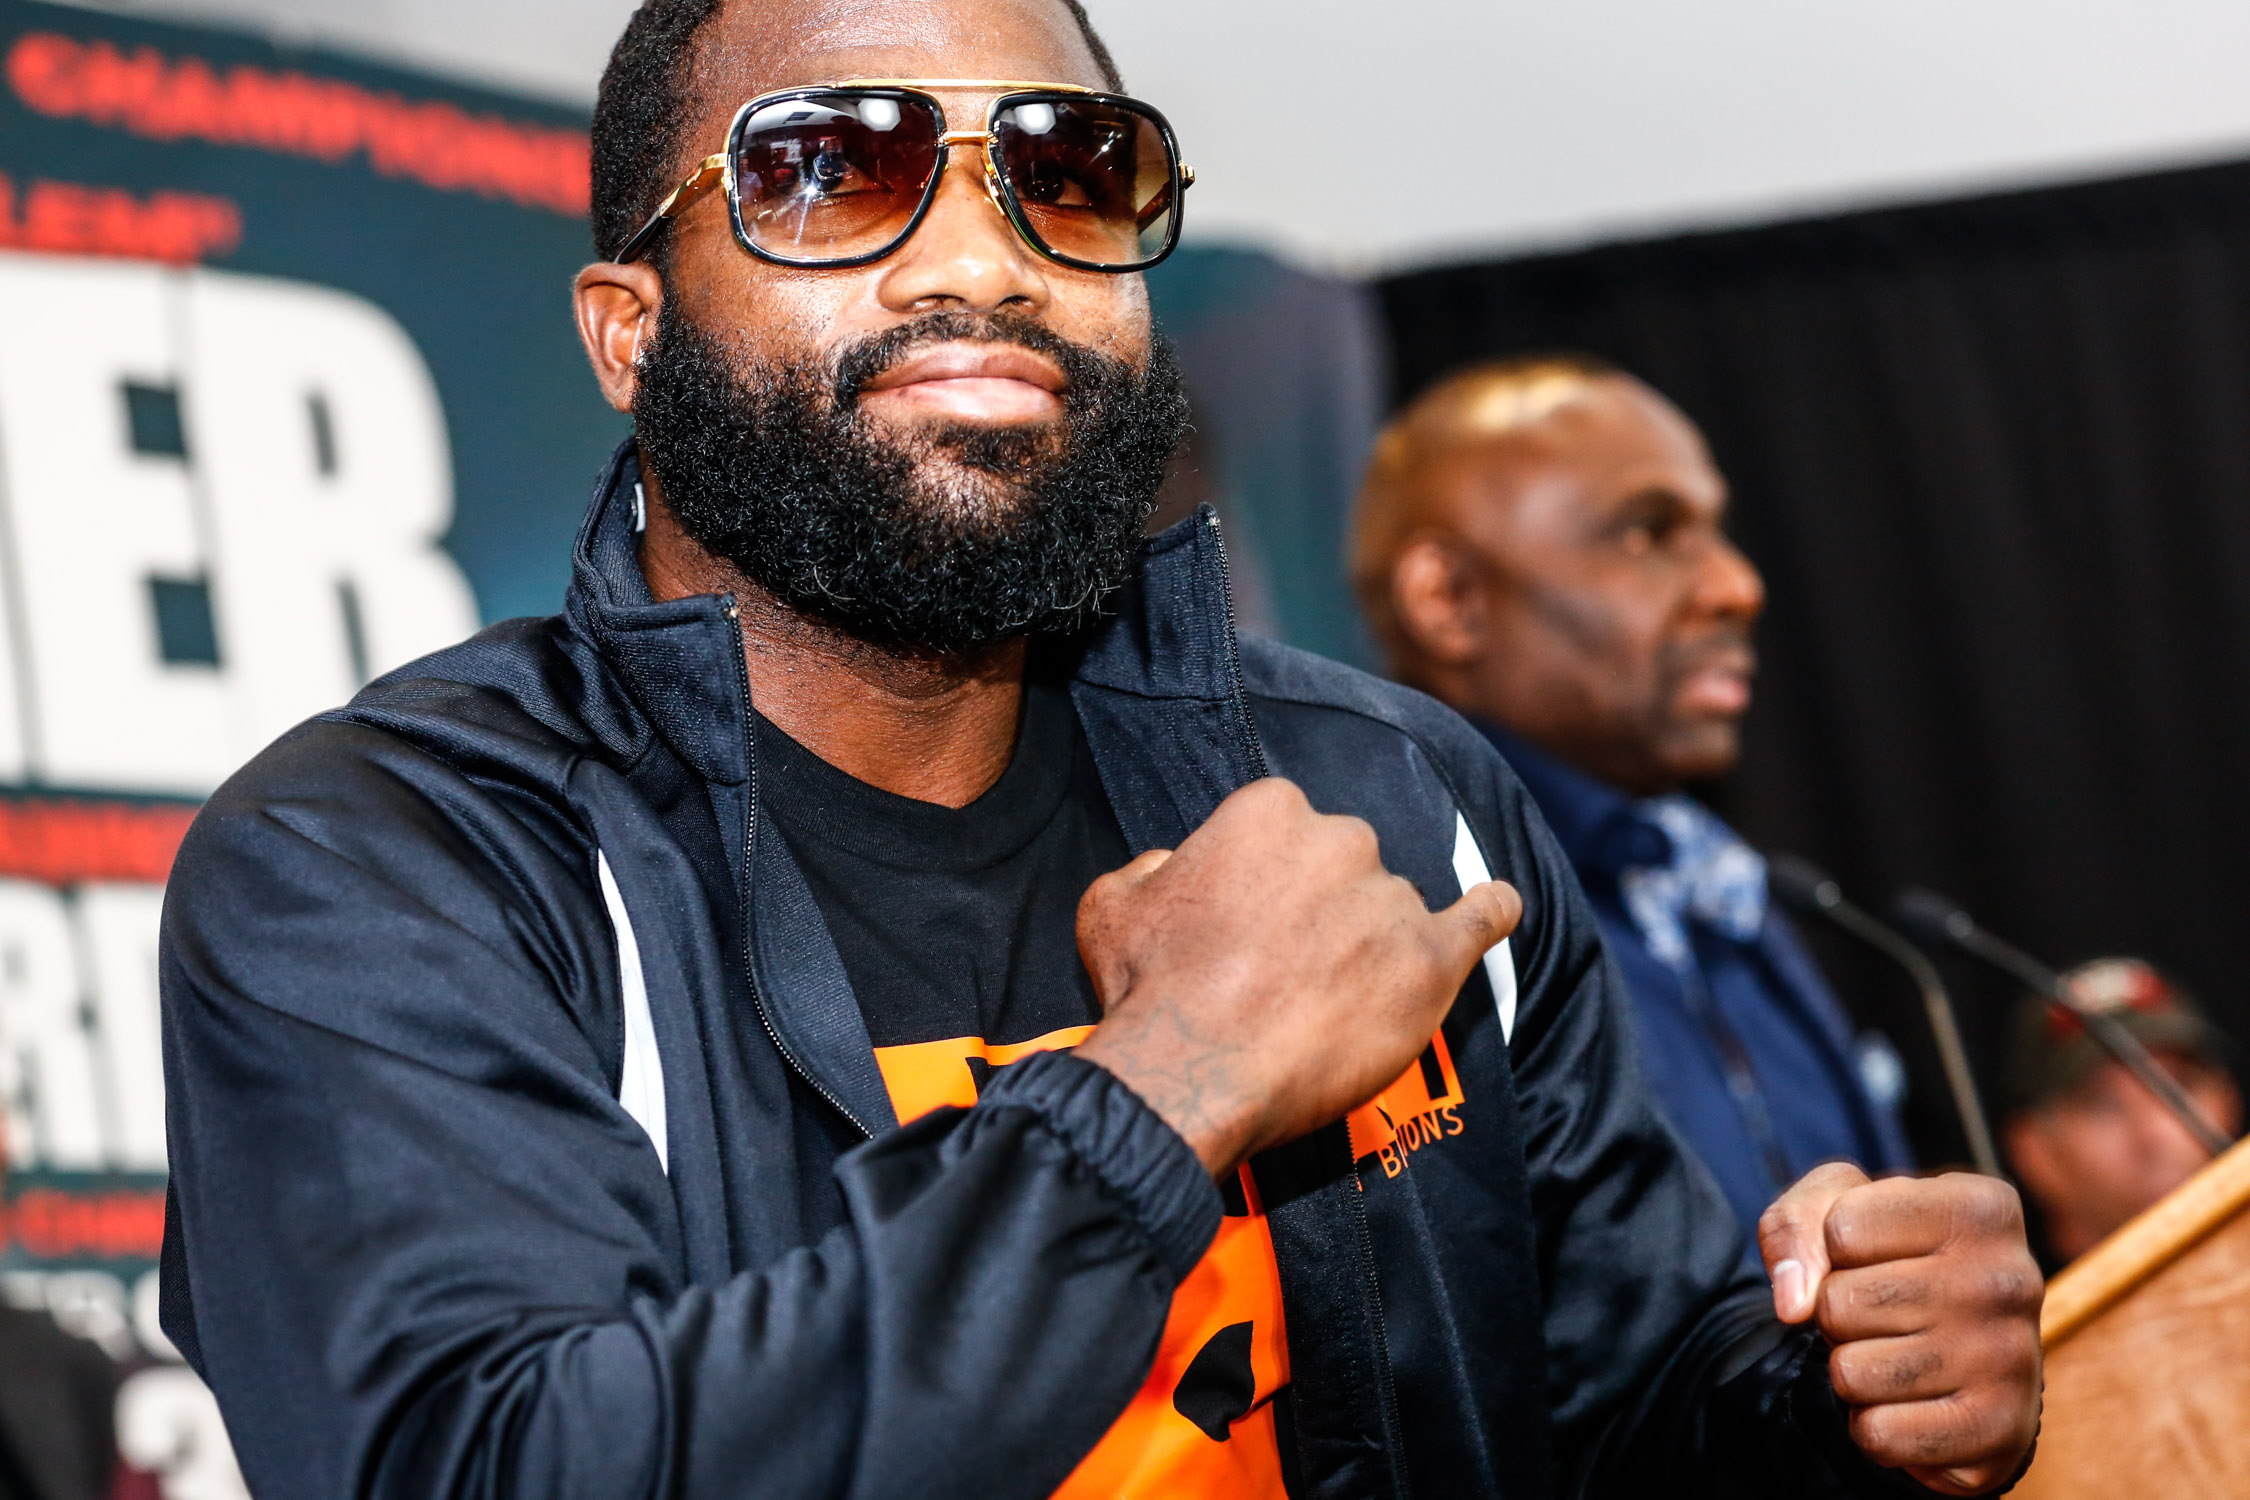 Criminal Charges Against Adrien Broner Dropped